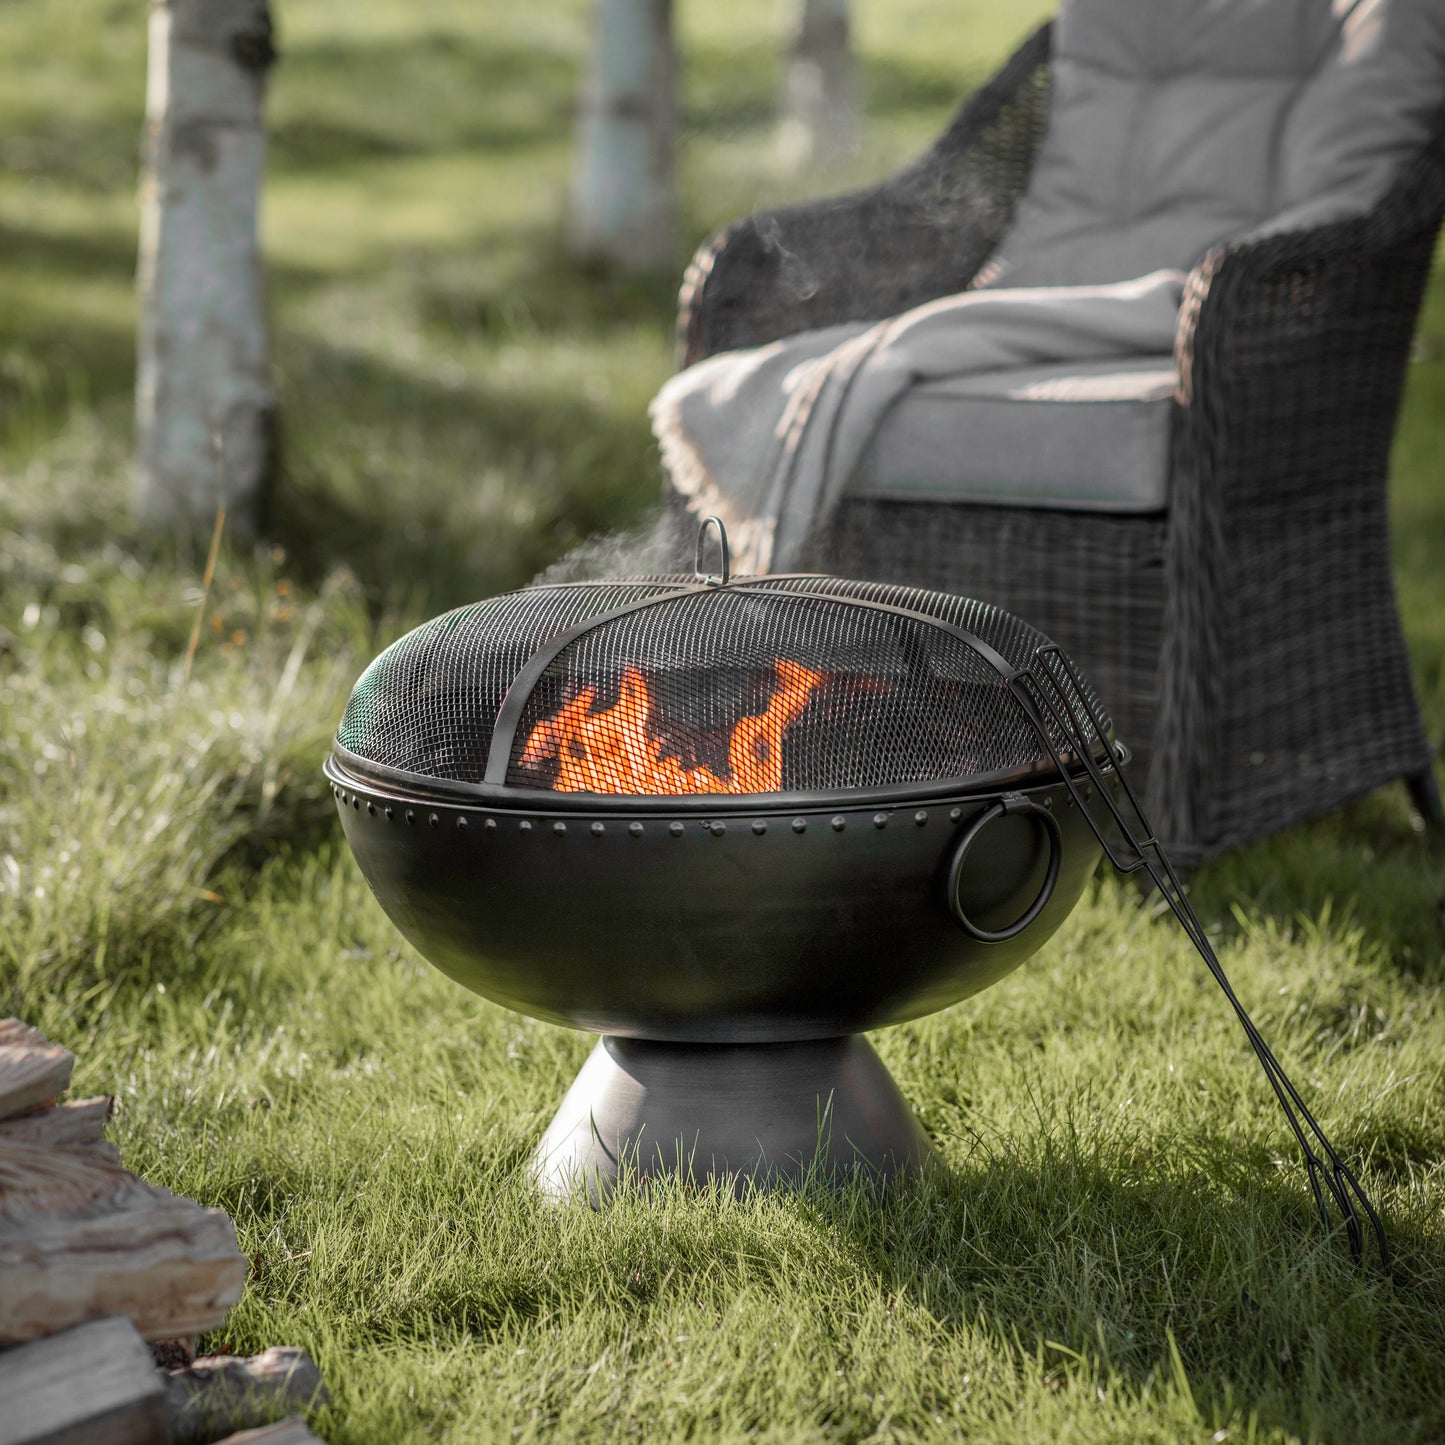 A Diptford Firepit from Kikiathome.co.uk, a home furniture and interior decor retailer, placed in the grass beside a chair.